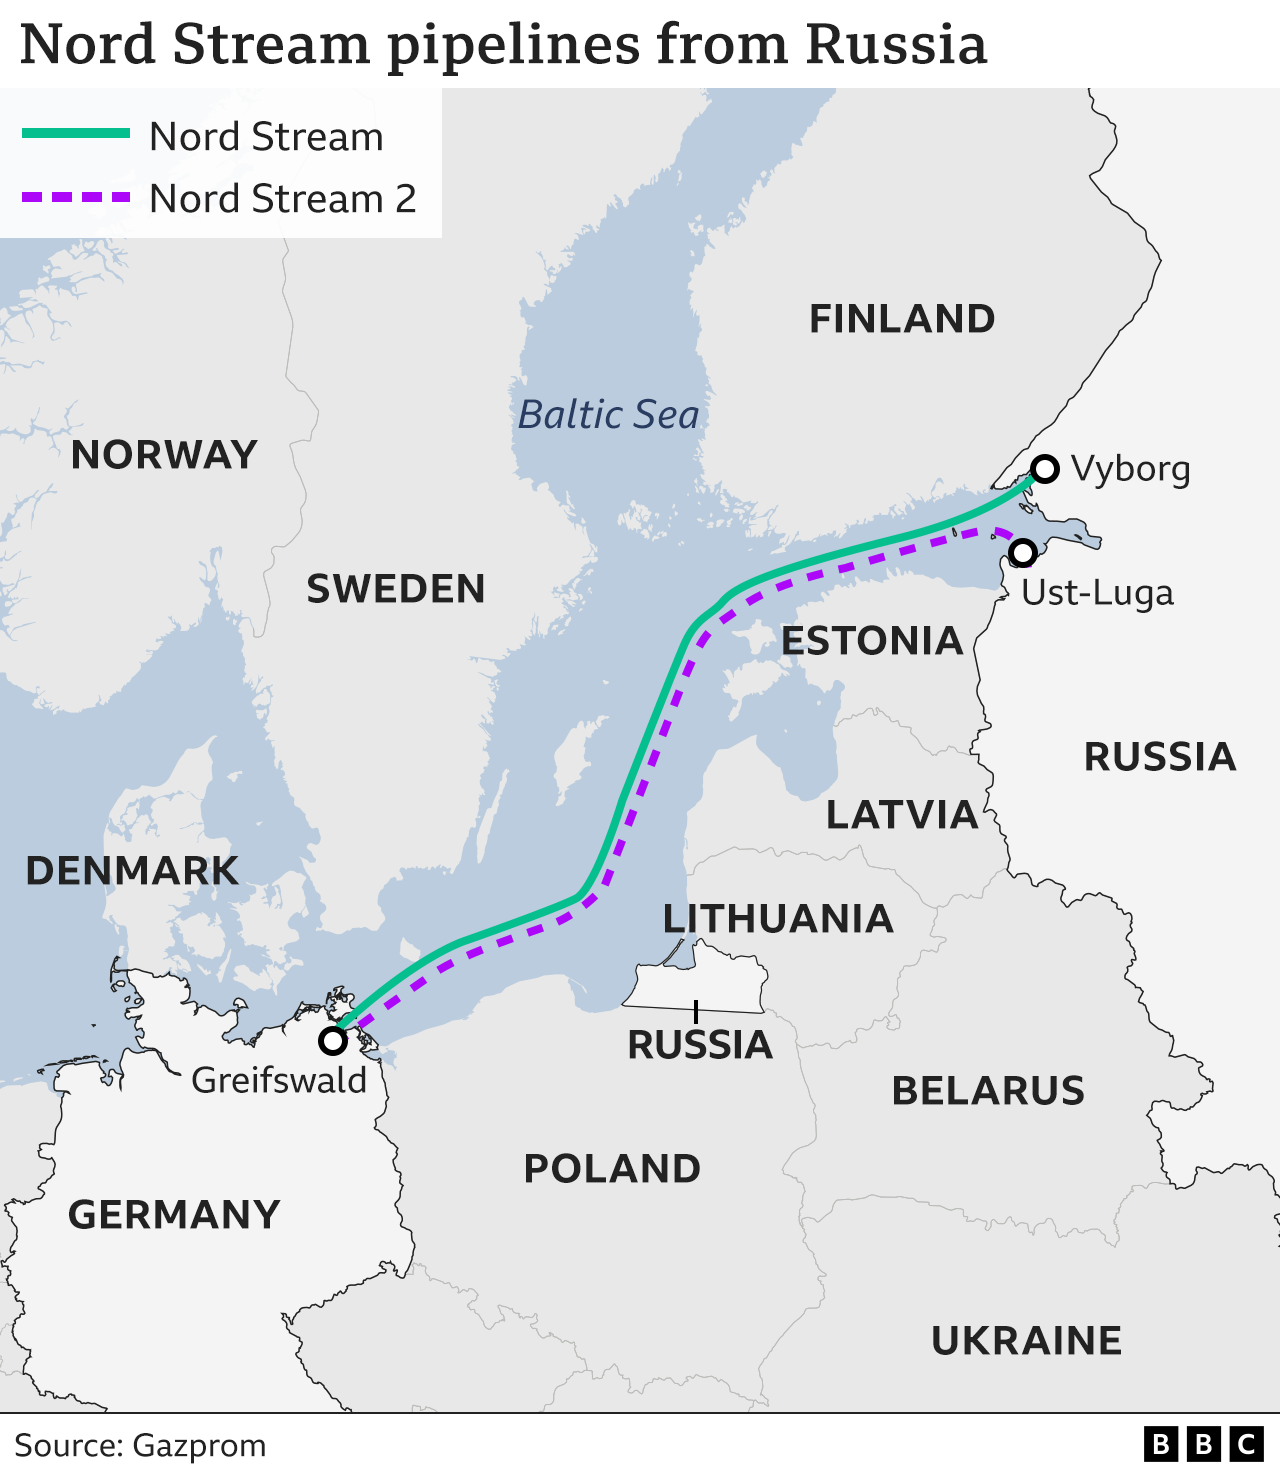 Map showing the Nord Stream pipelines from Russia